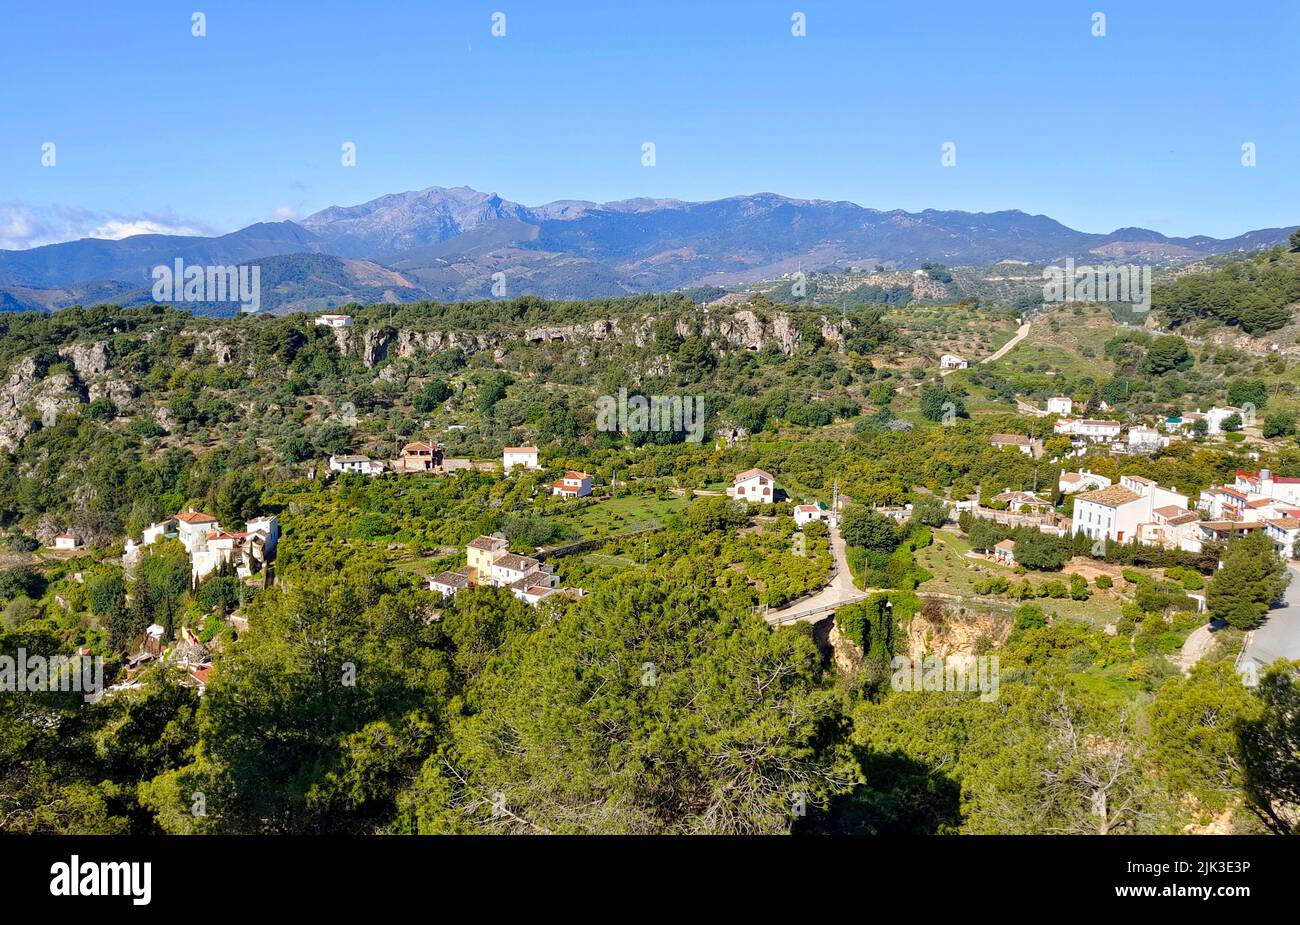 Rural village in the mountains of Malaga in springtime Stock Photo